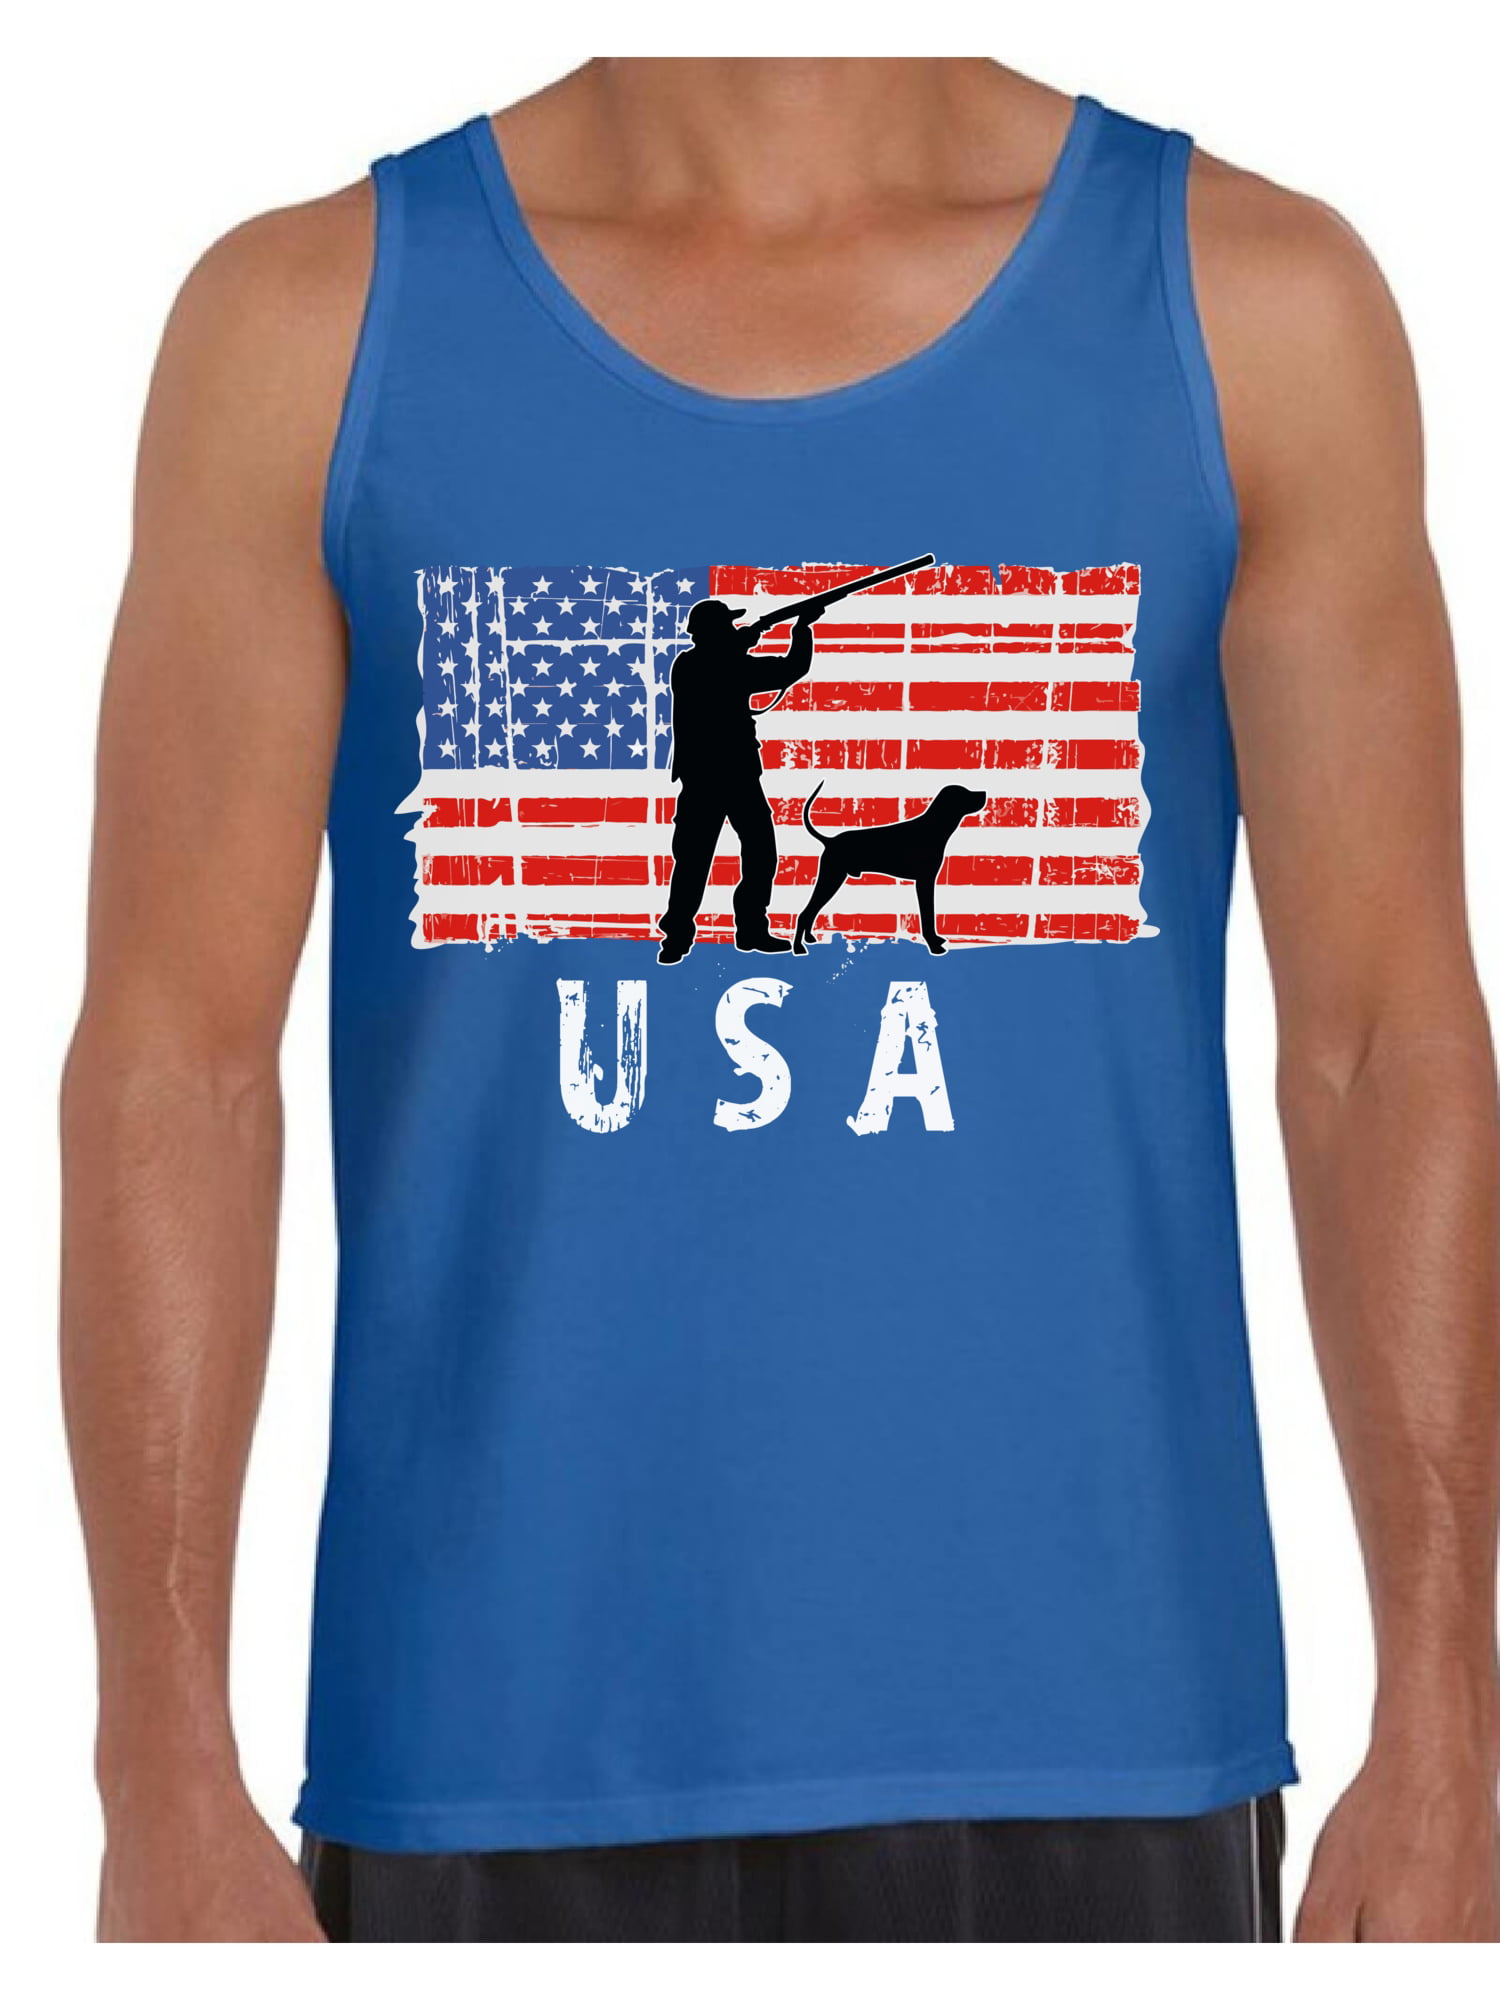 Tee Hunt Navy American Flag Muscle Shirt Patriotic Stars and Stripes Military Sleeveless 